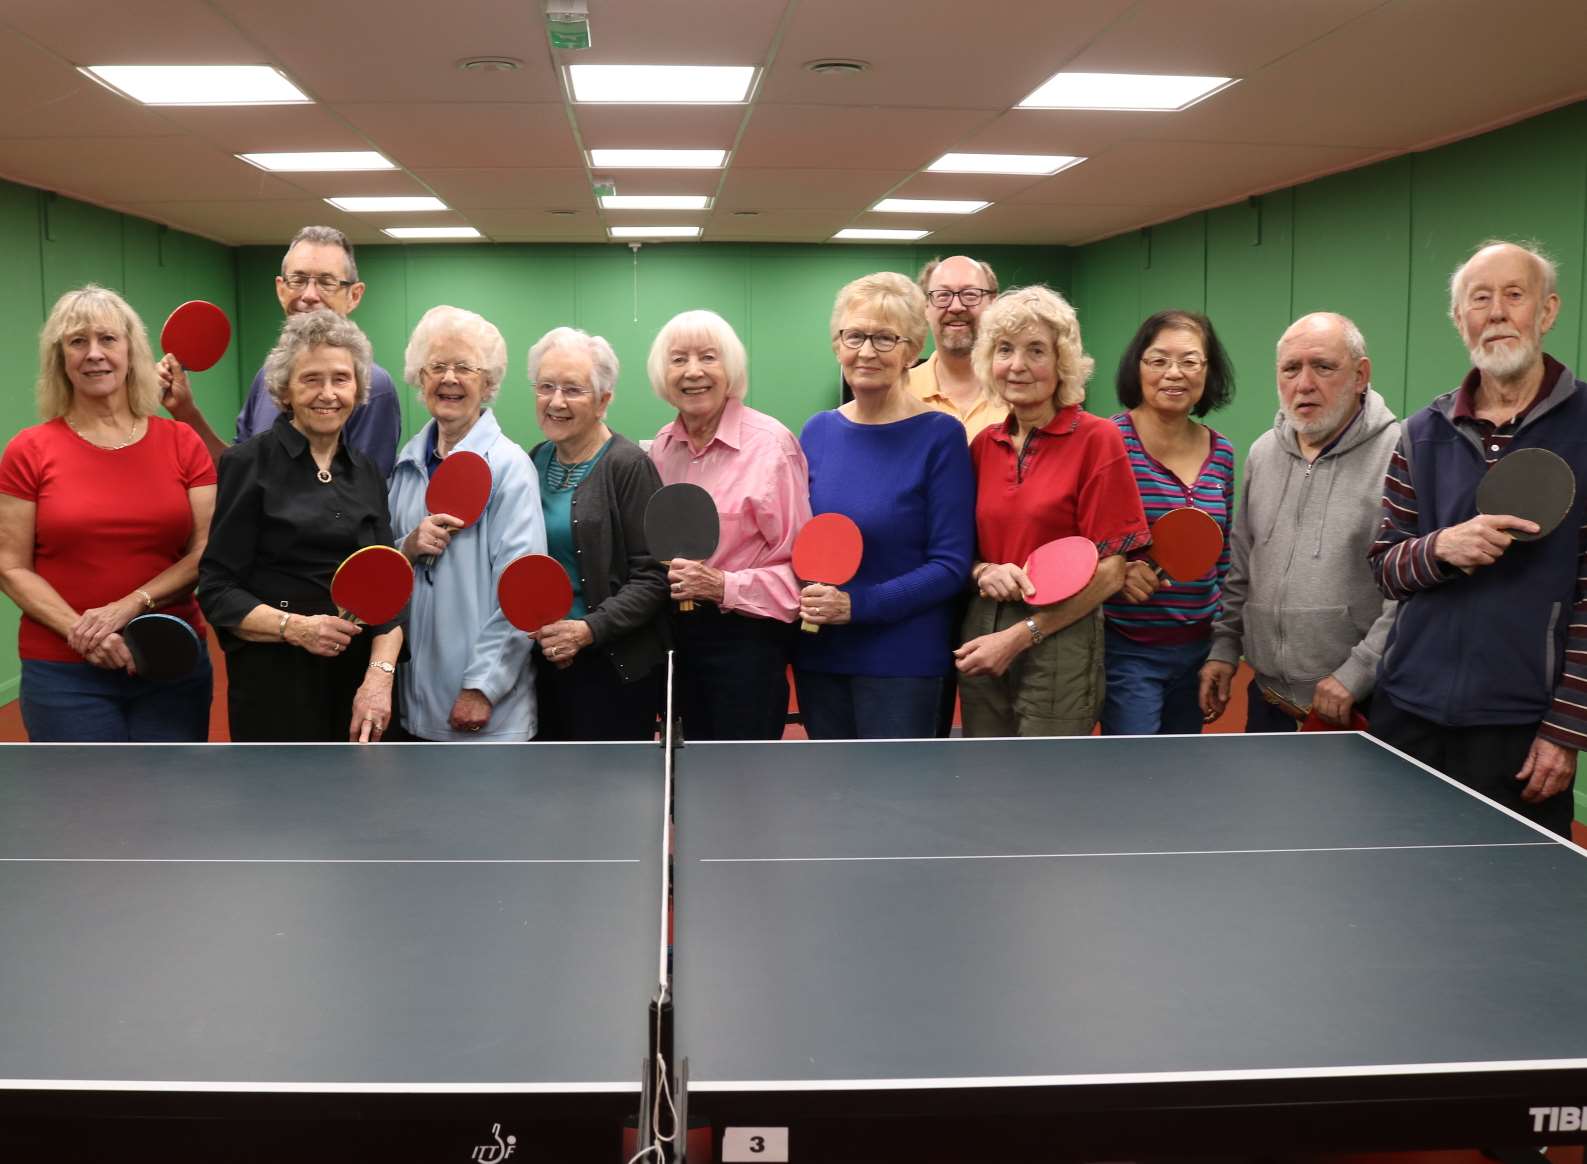 Pam Butcher (middle) with members of Meopham Table Tennis Club